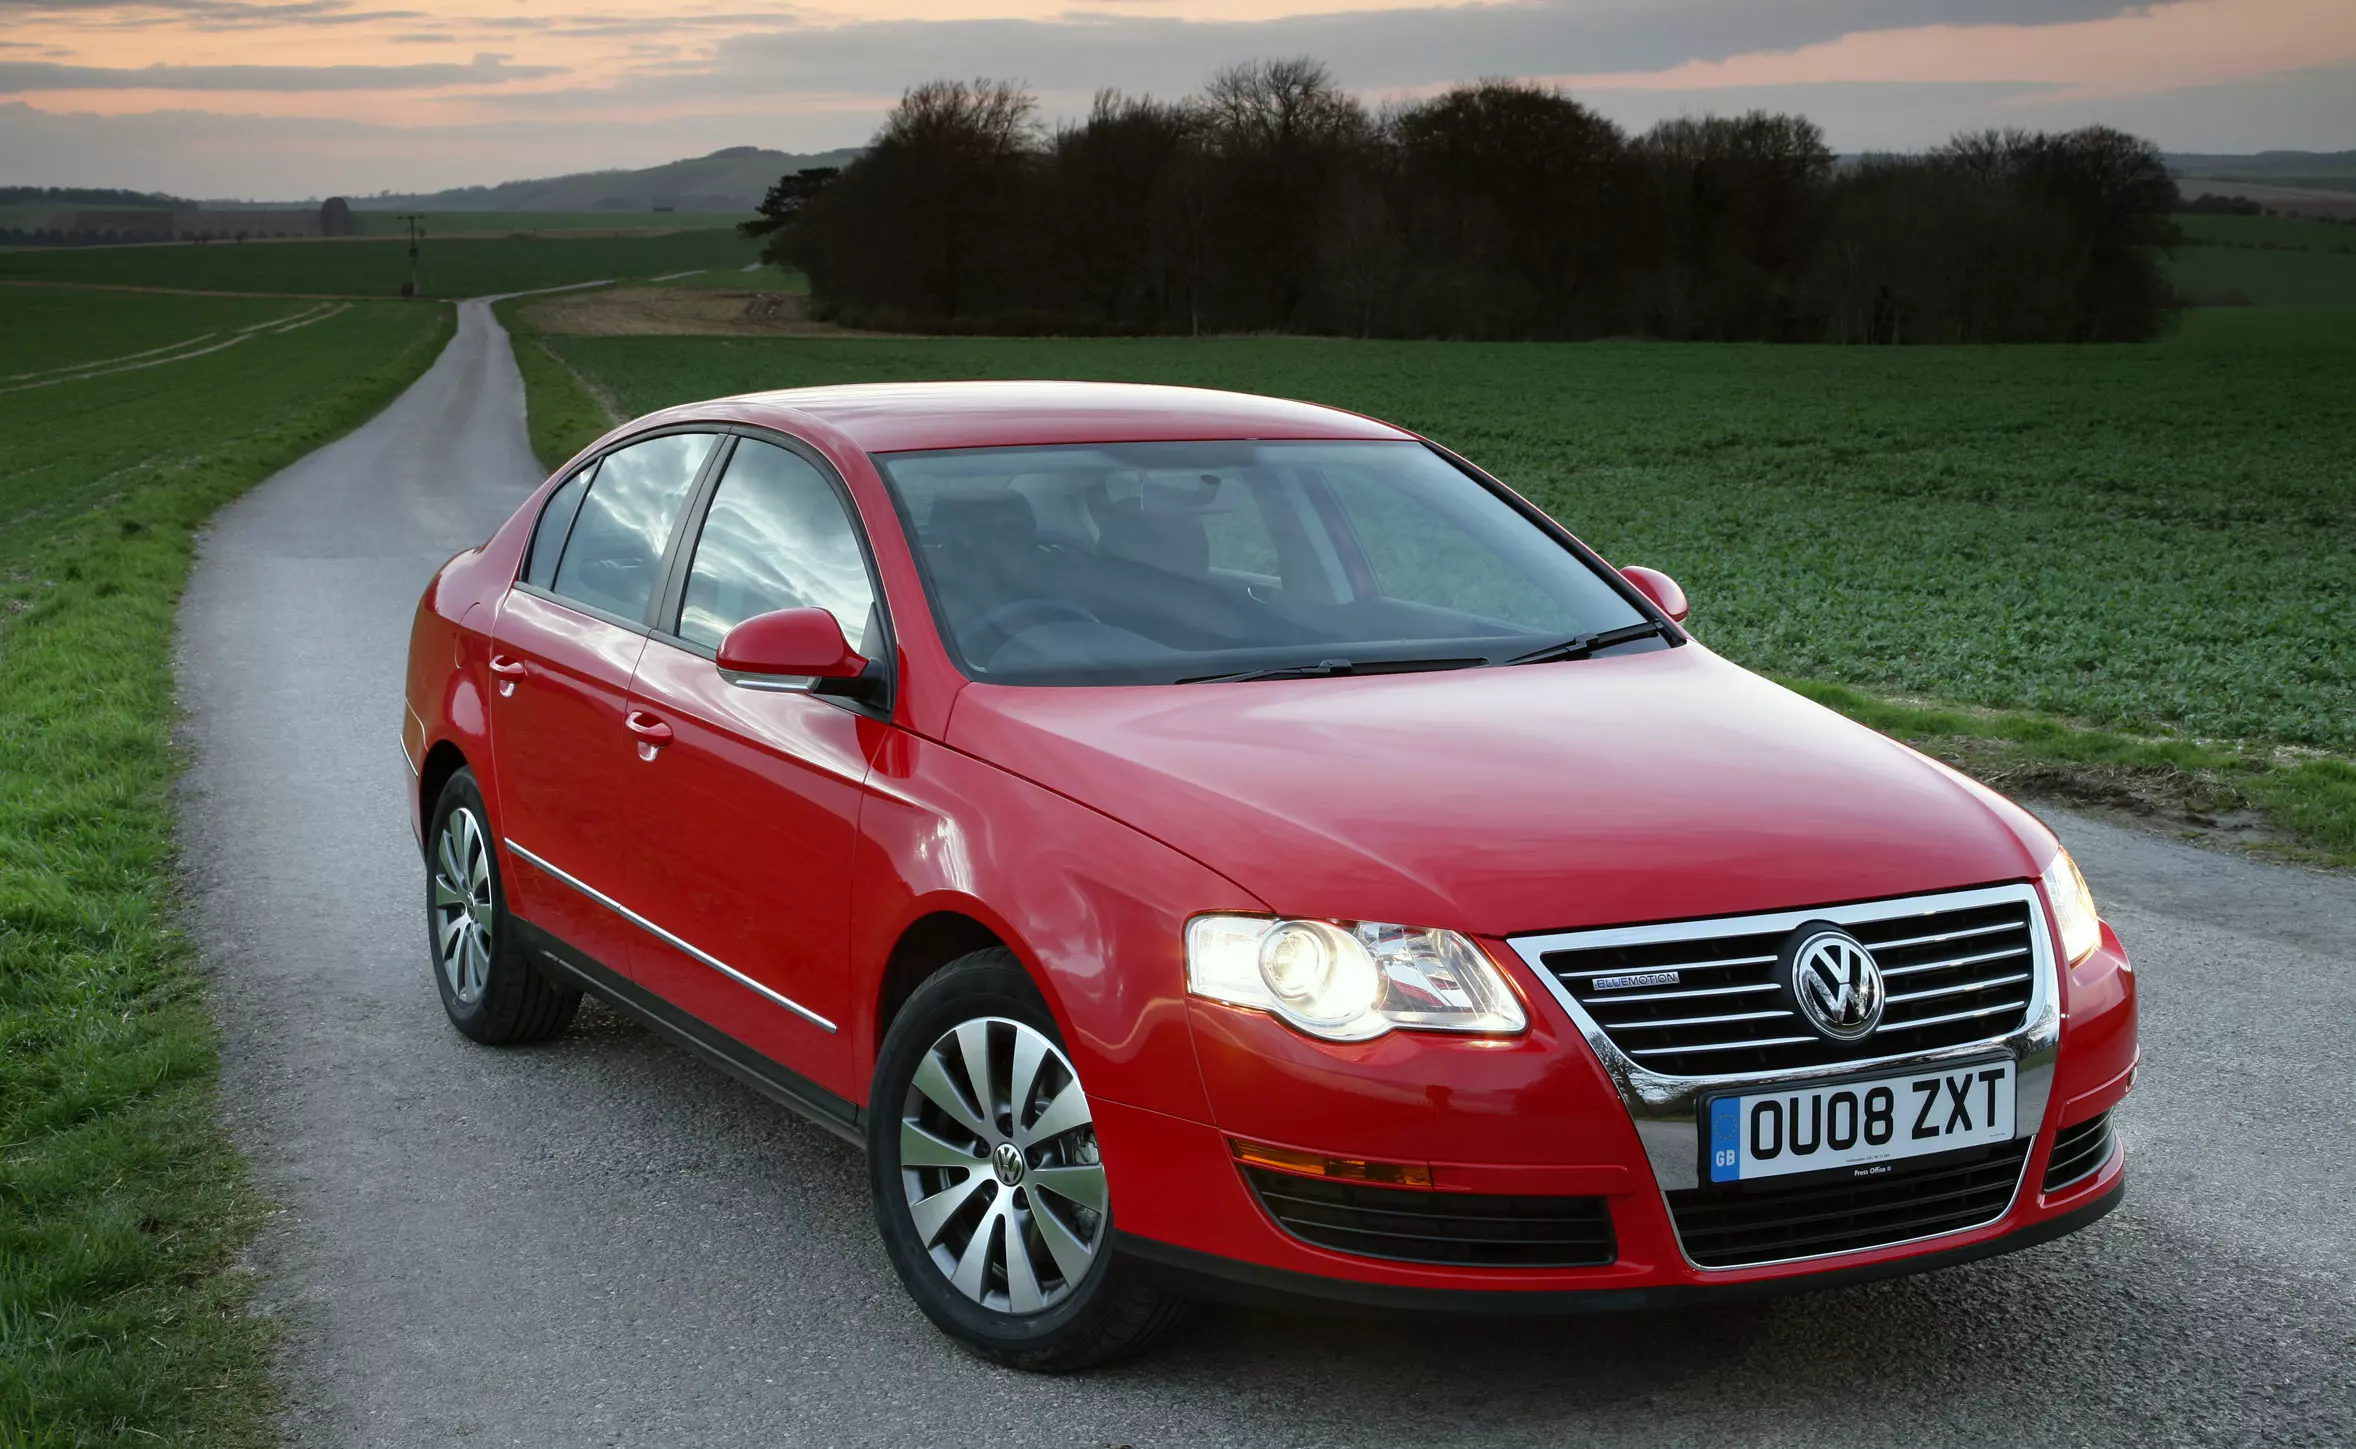 VW Passat B6 2005-2010 Owners Review & Buying Guide - Long Term Ownership  Advice 